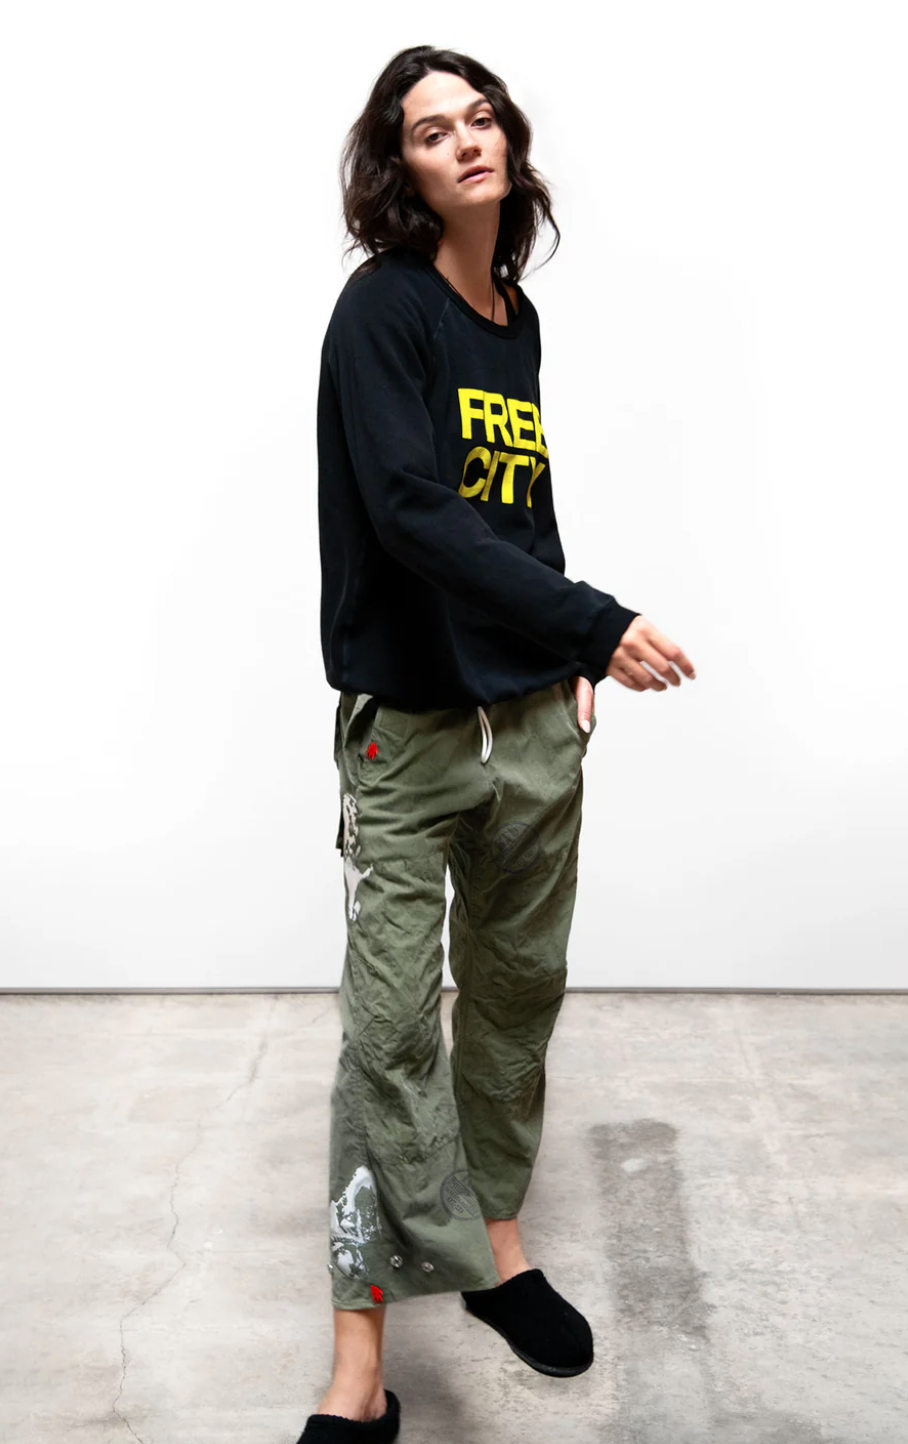 A woman in a casual black hoodie made of French terry and patterned green cargo pants stands against a plain backdrop, looking to the side with a relaxed pose wearing the FREECITY SUPERYUMM BIGGY RAGLAN from Free City (sparrow, LLC).